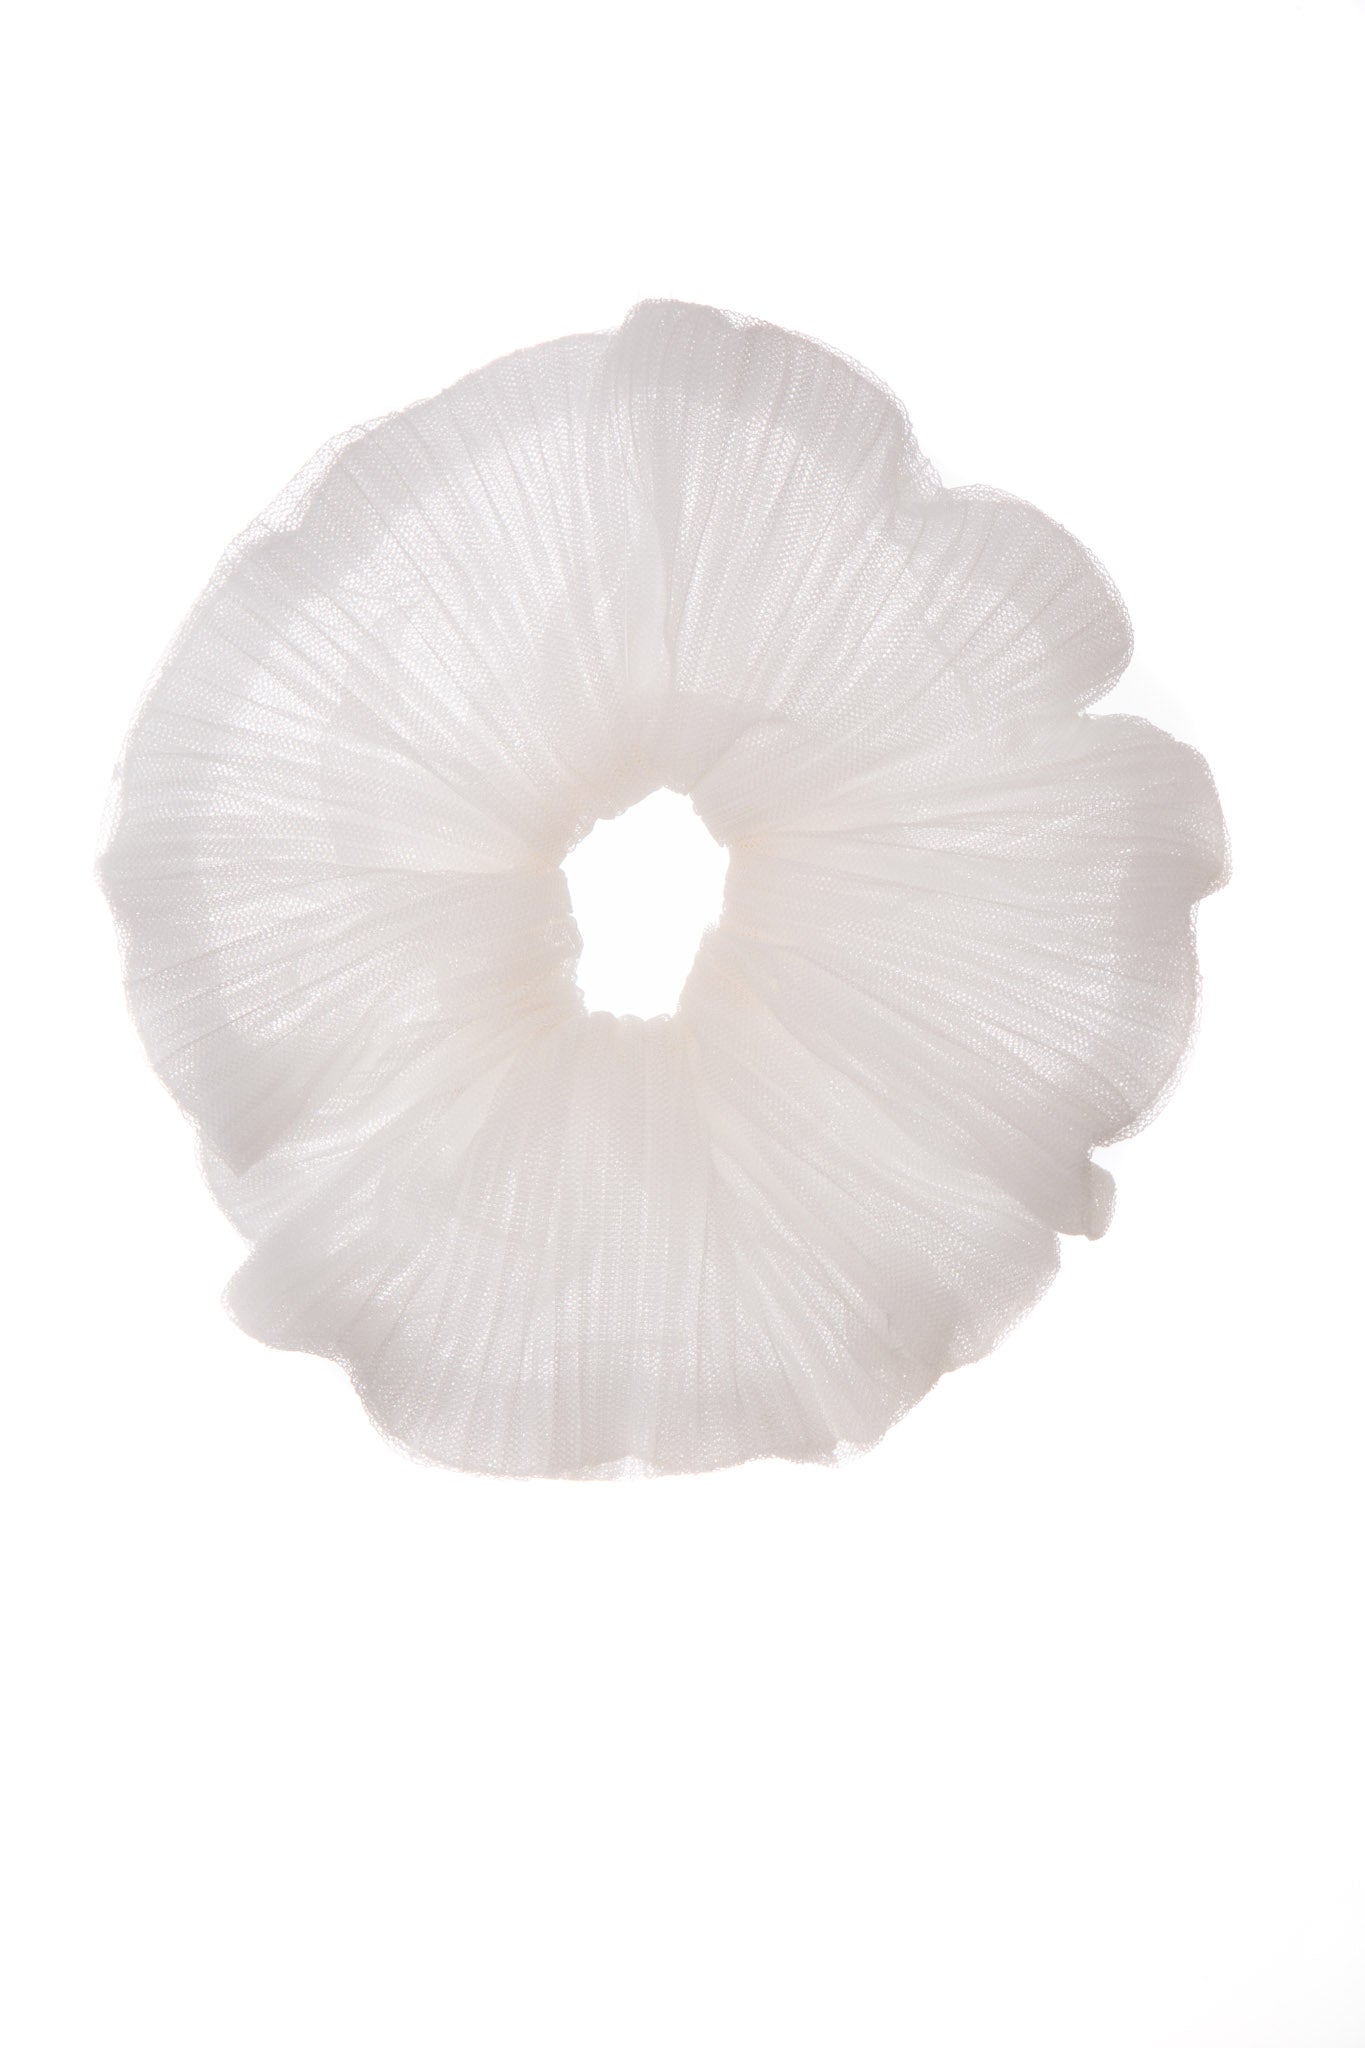 A retro 60s inspired scrunchie of ivory pleated tulle. Perfect to complete a sleek ponytail and minimalist bridal look. Or a perfect gift for each of your bridesmaids!